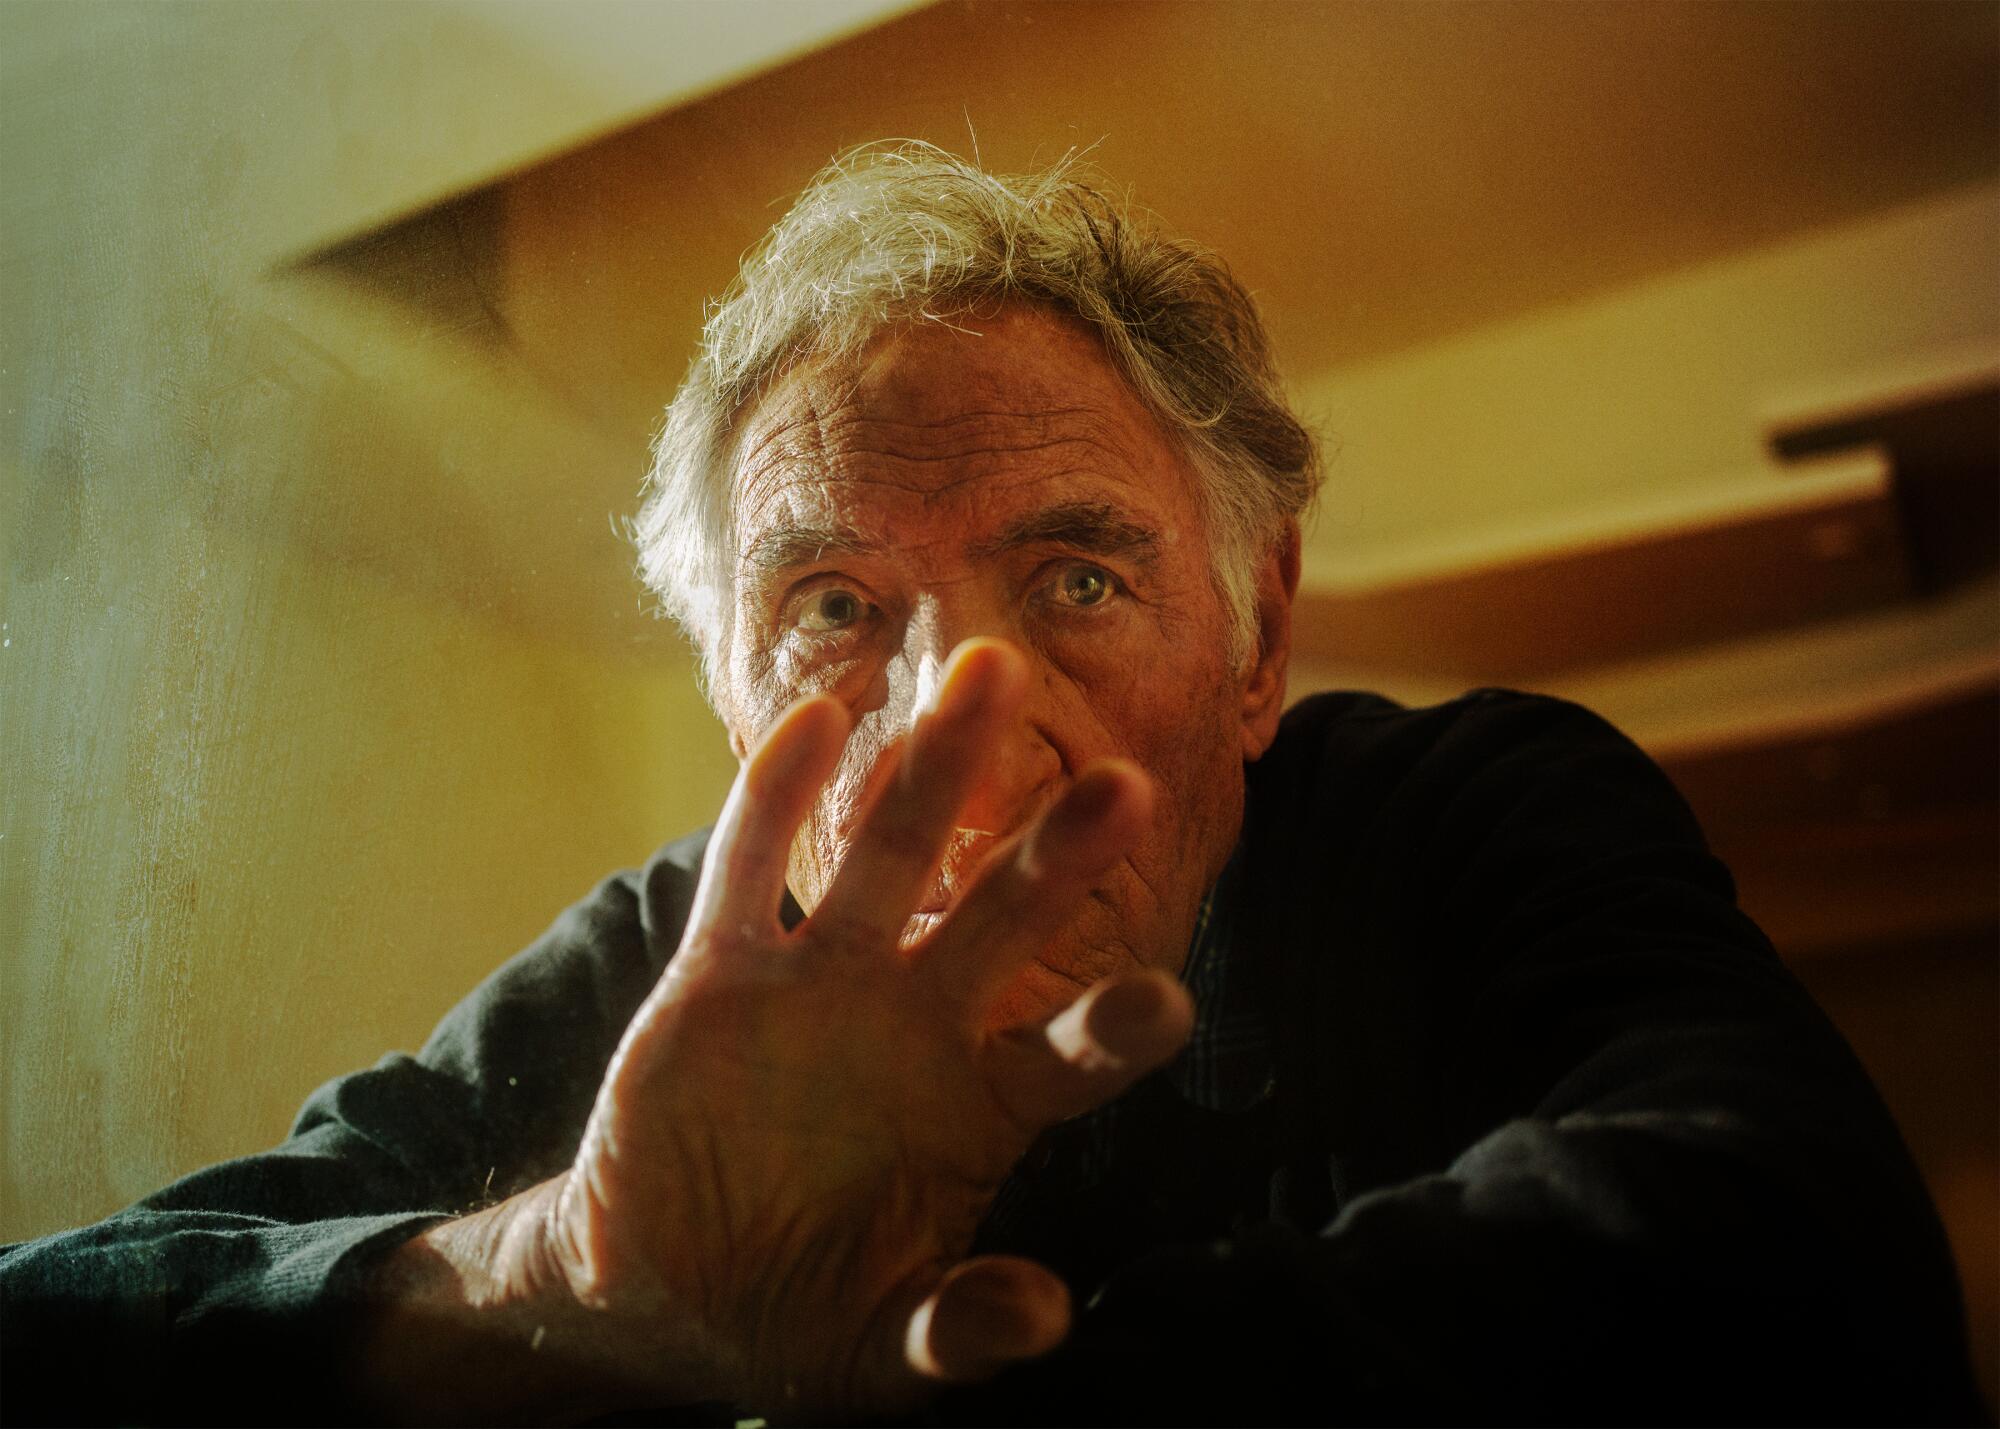 Judd Hirsch holds up his hand in front of the lower half of his face. 